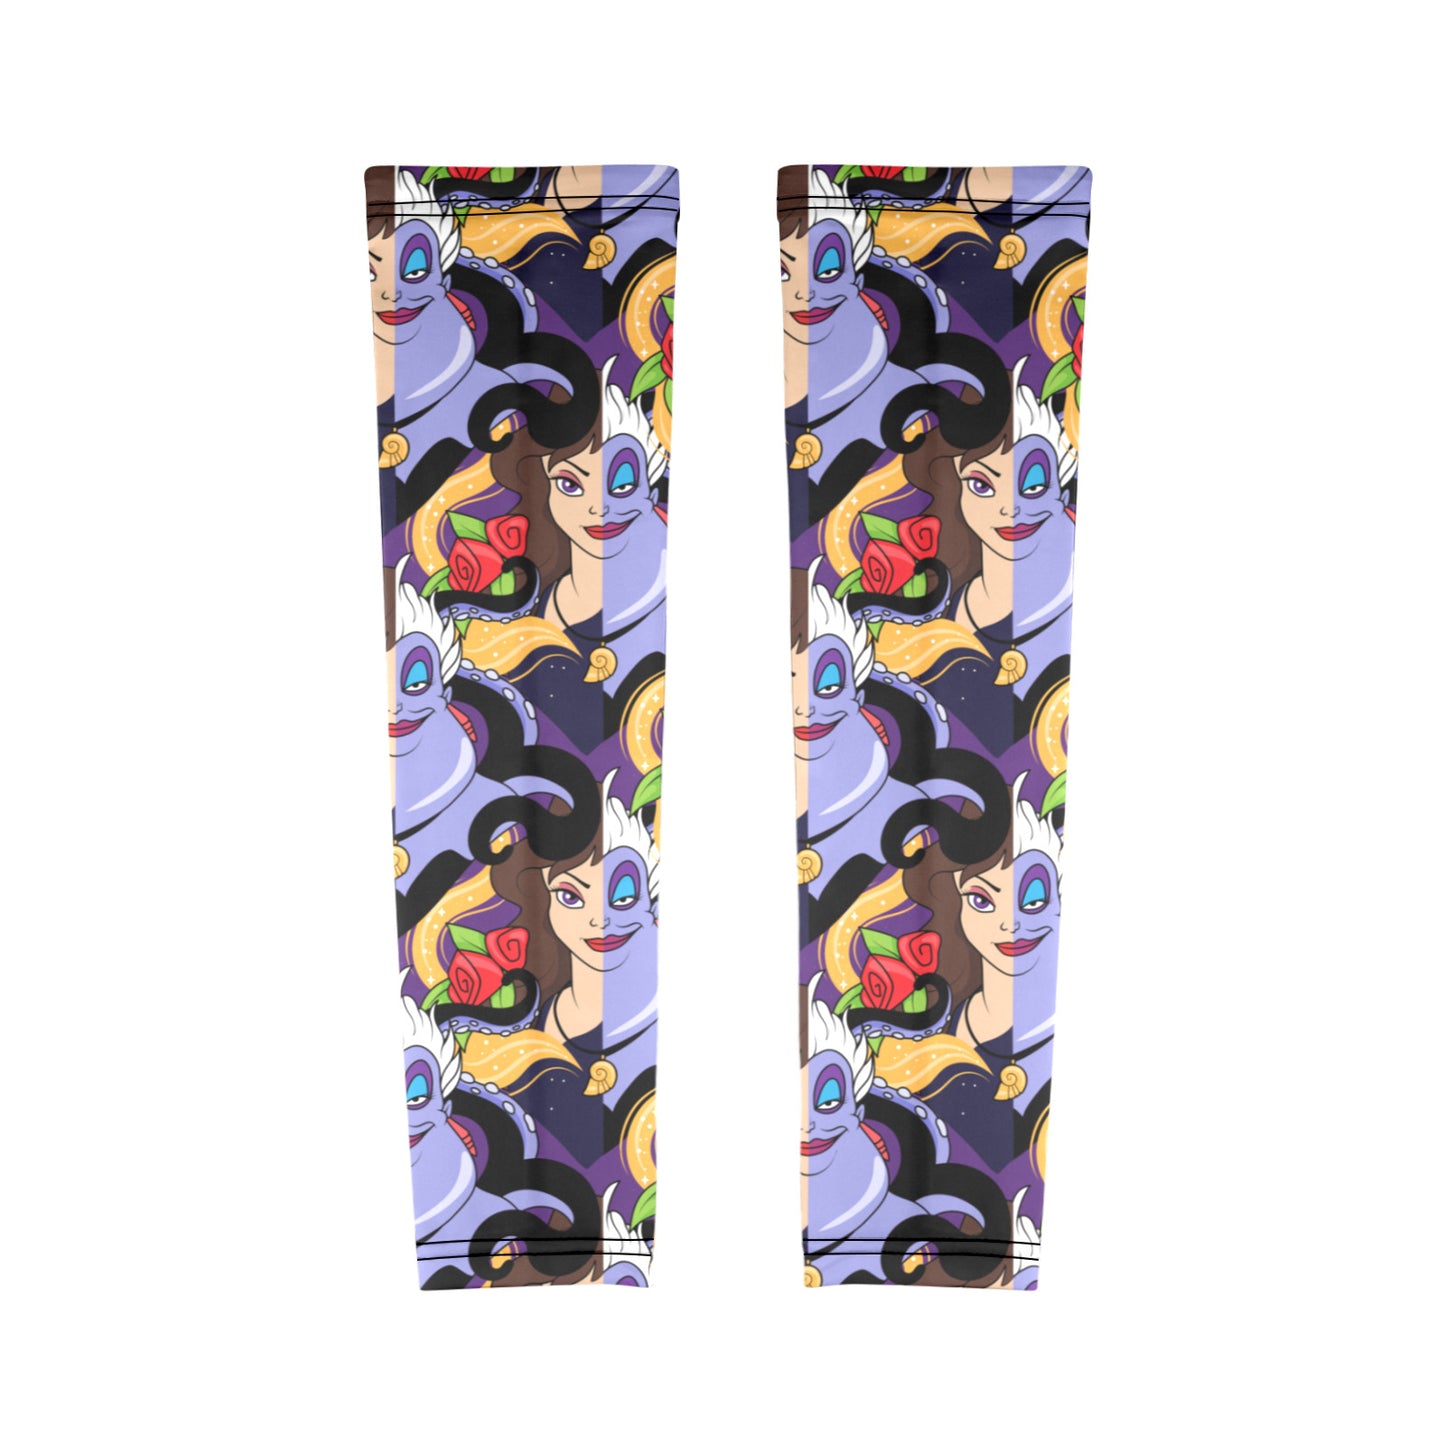 Ursula Arm Sleeves (Set of Two)